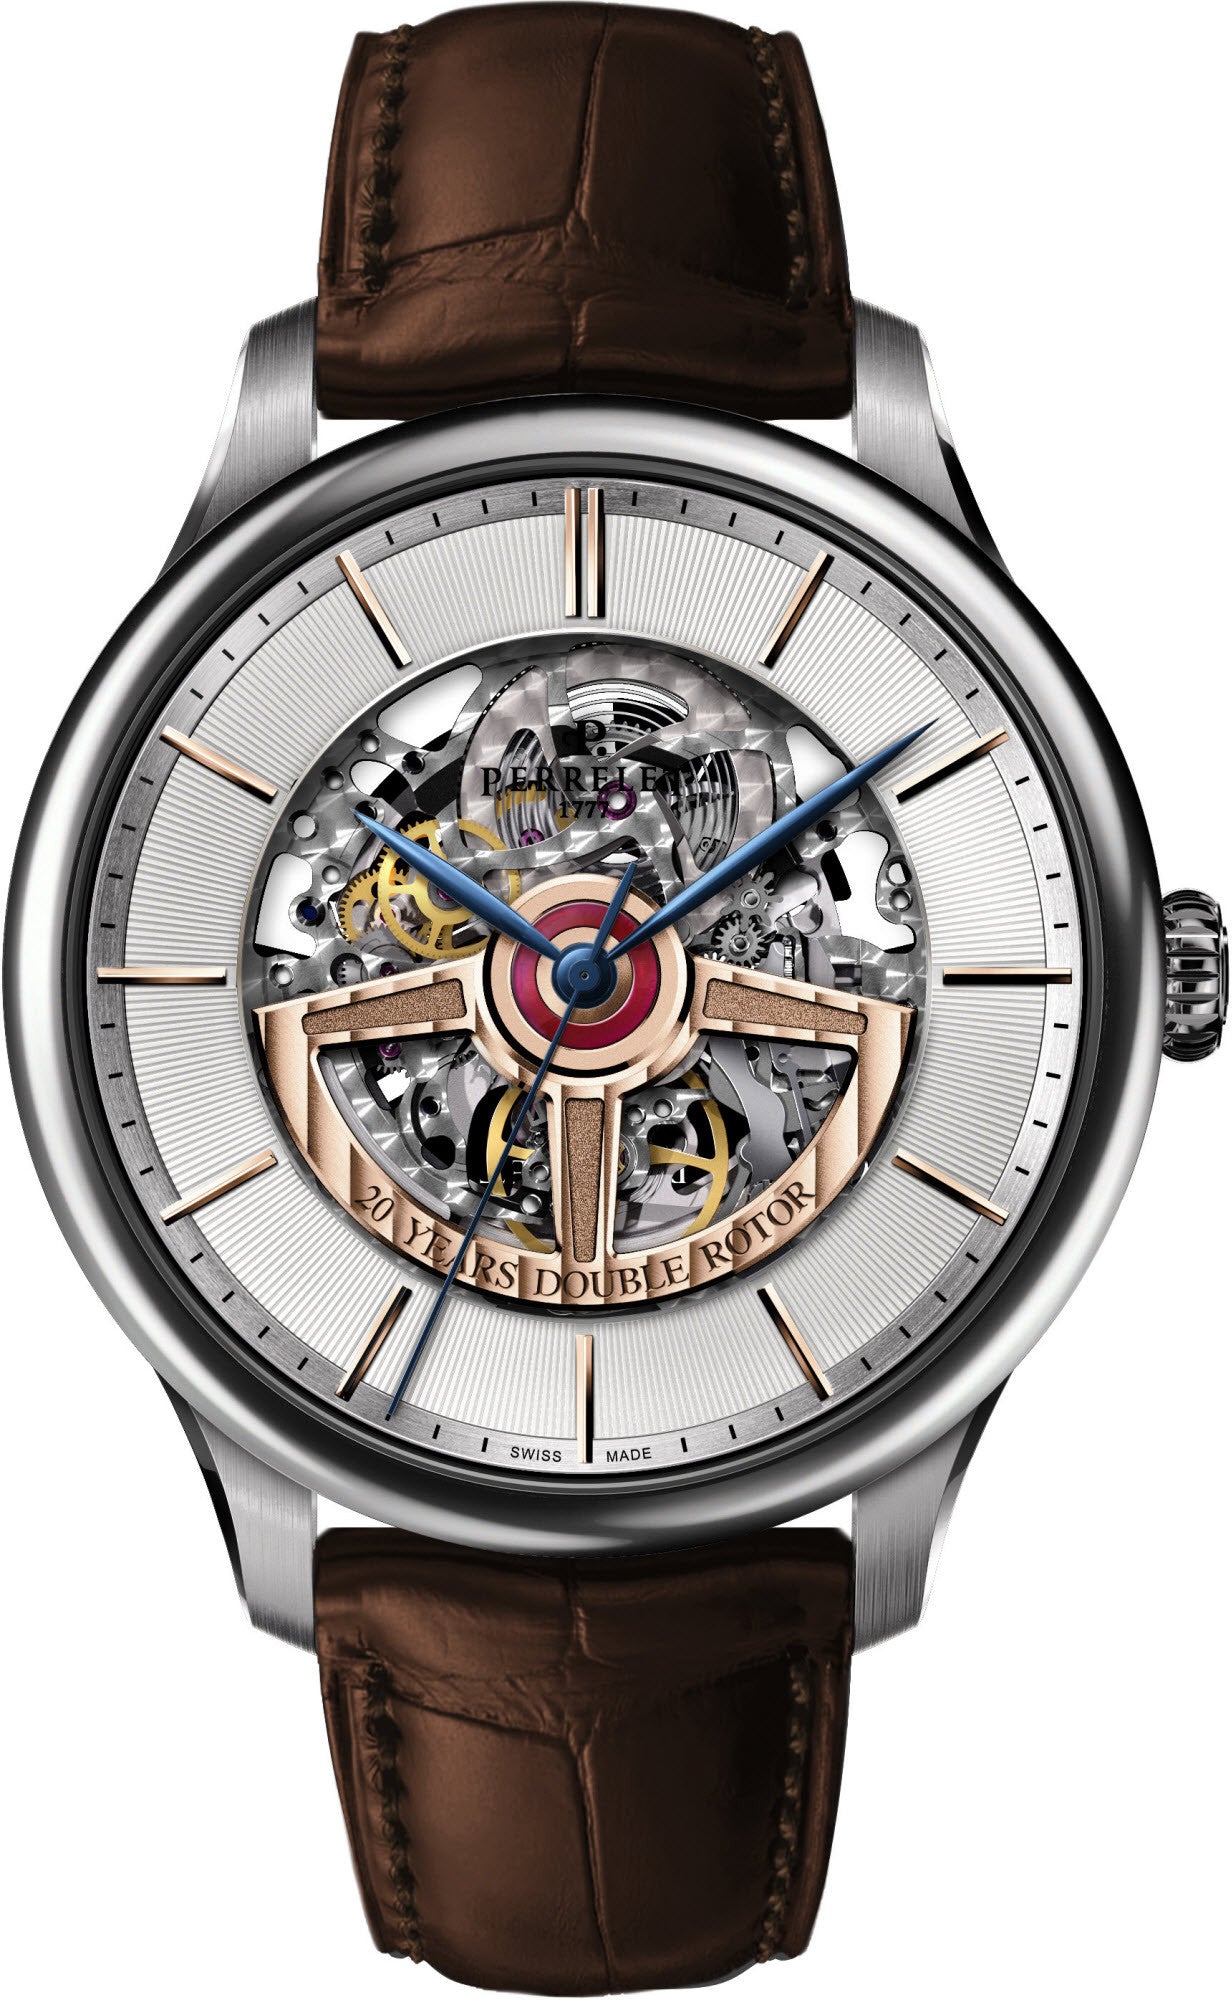 Perrelet Watch First Class Double Rotor 20th Anniversary Limited Edition